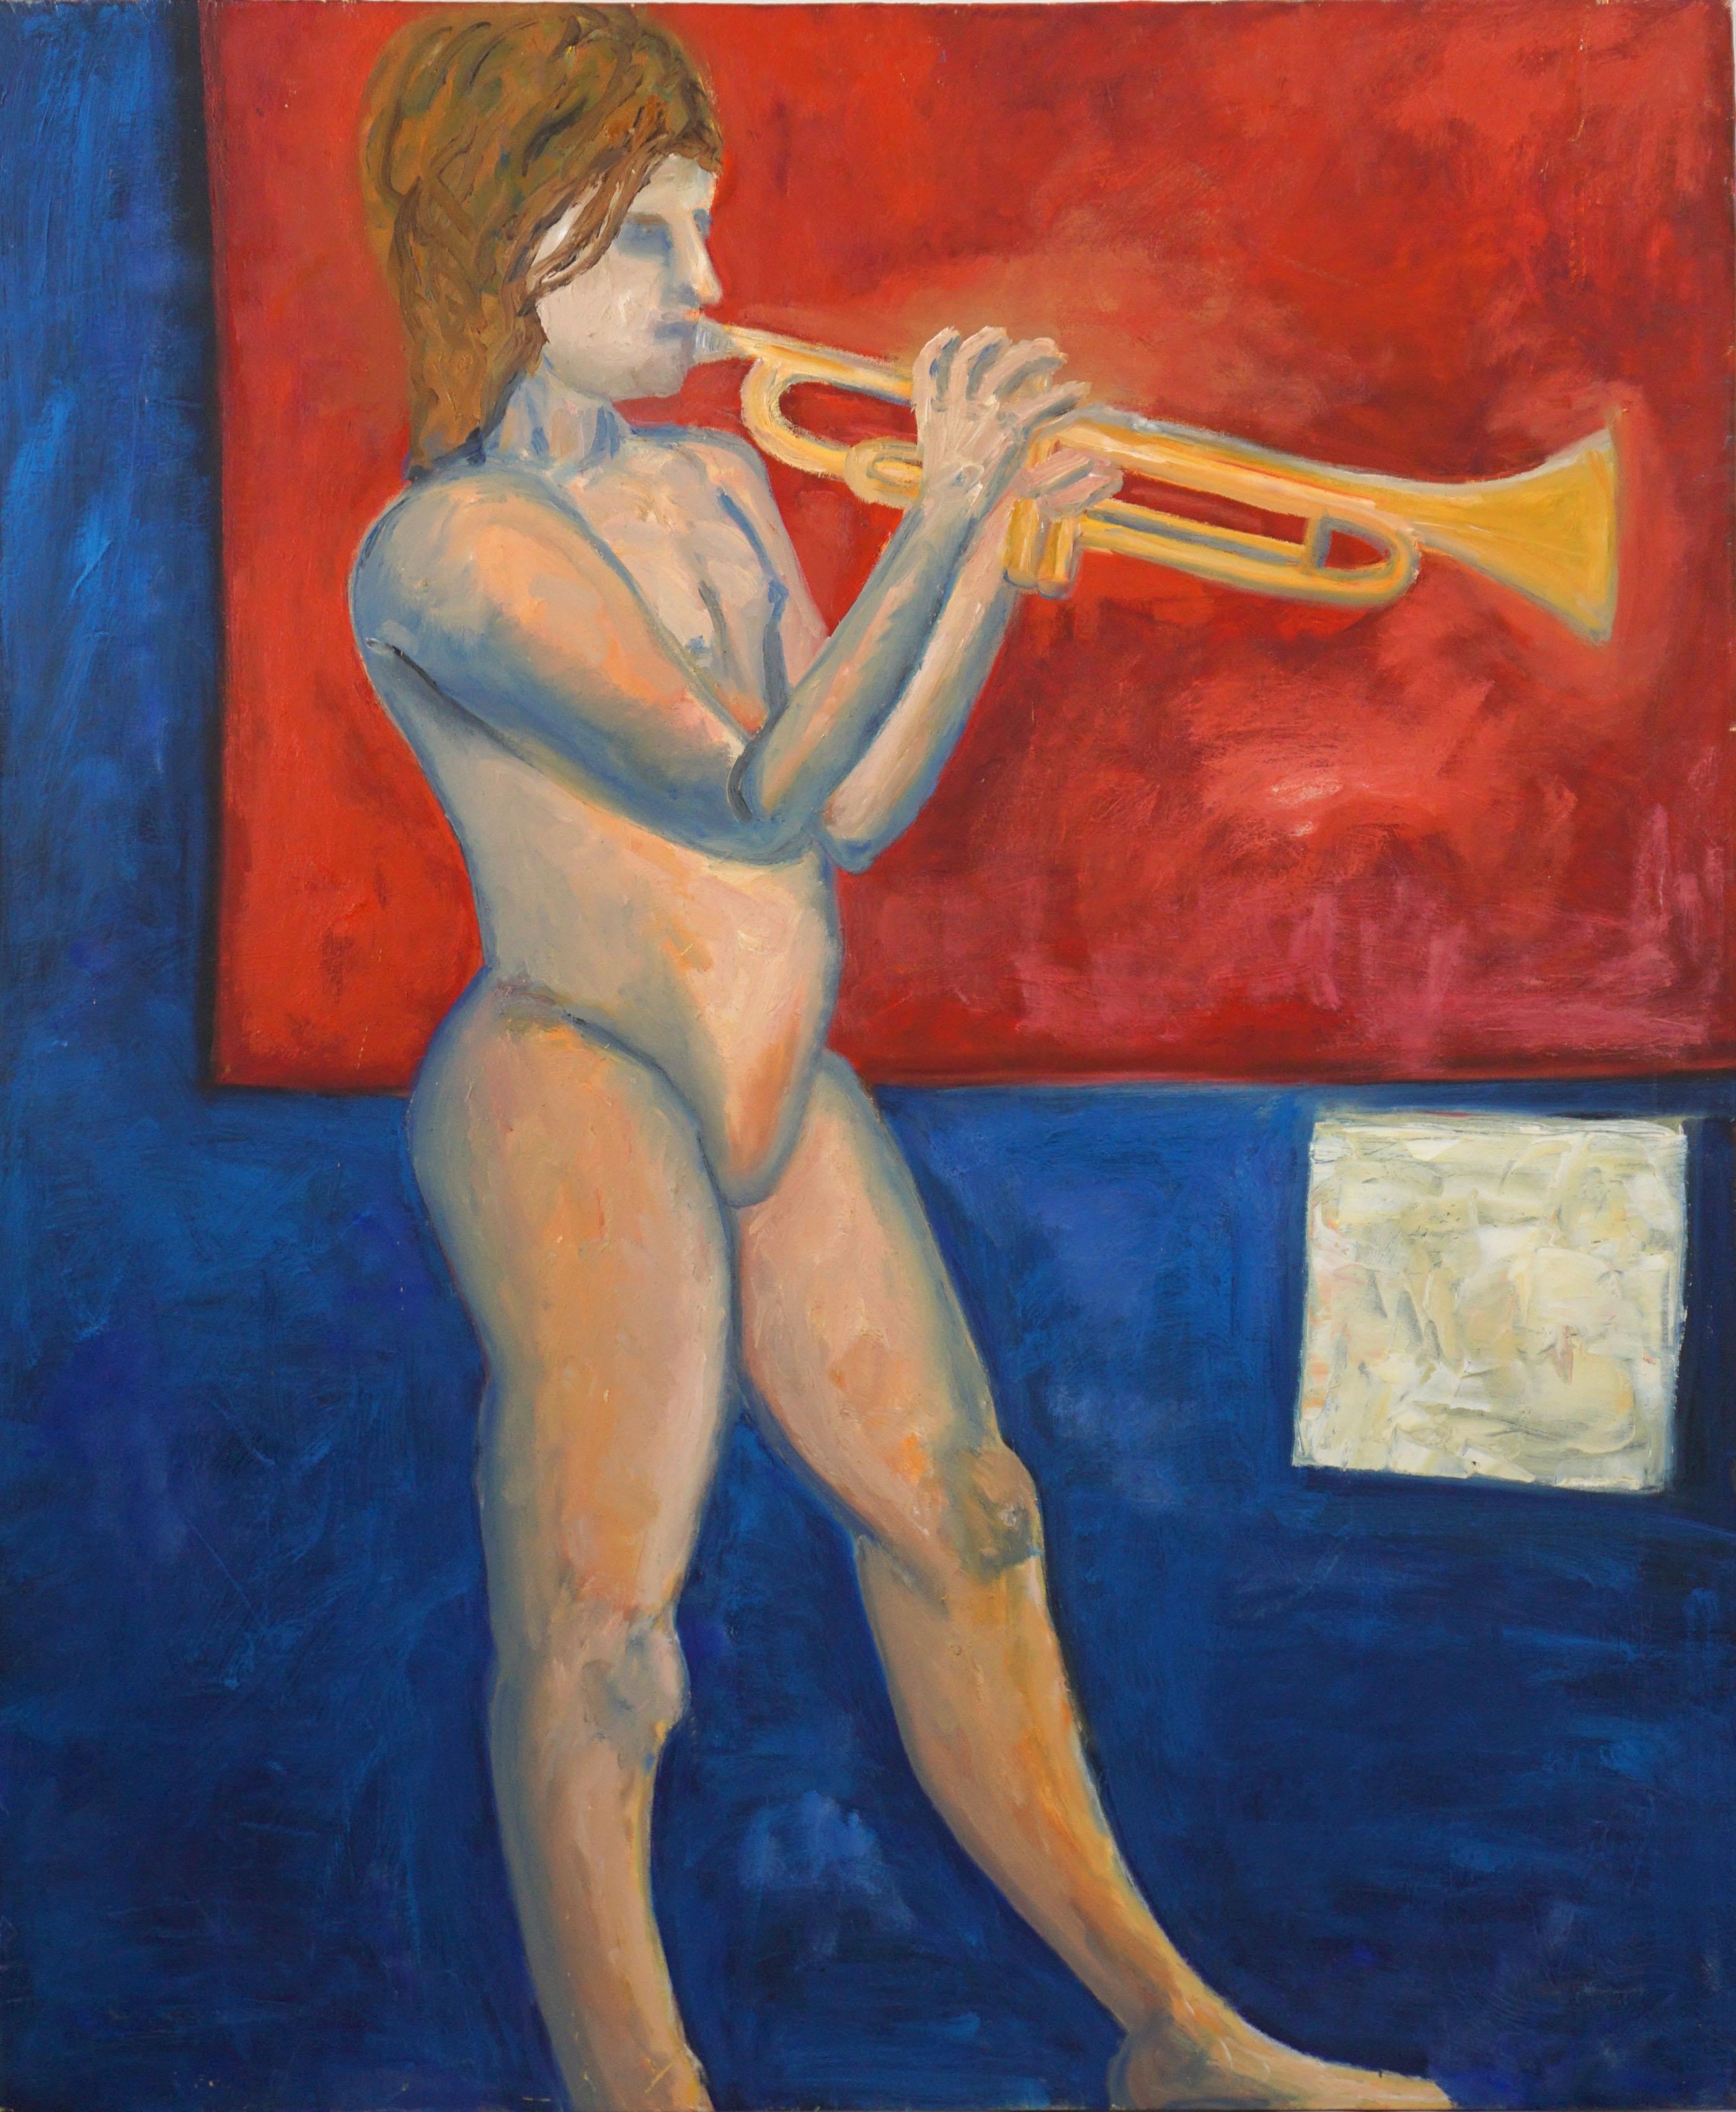 Unknown Figurative Painting - Large Scale Bay Area Figurative Inspired -- The Young Trumpet Player